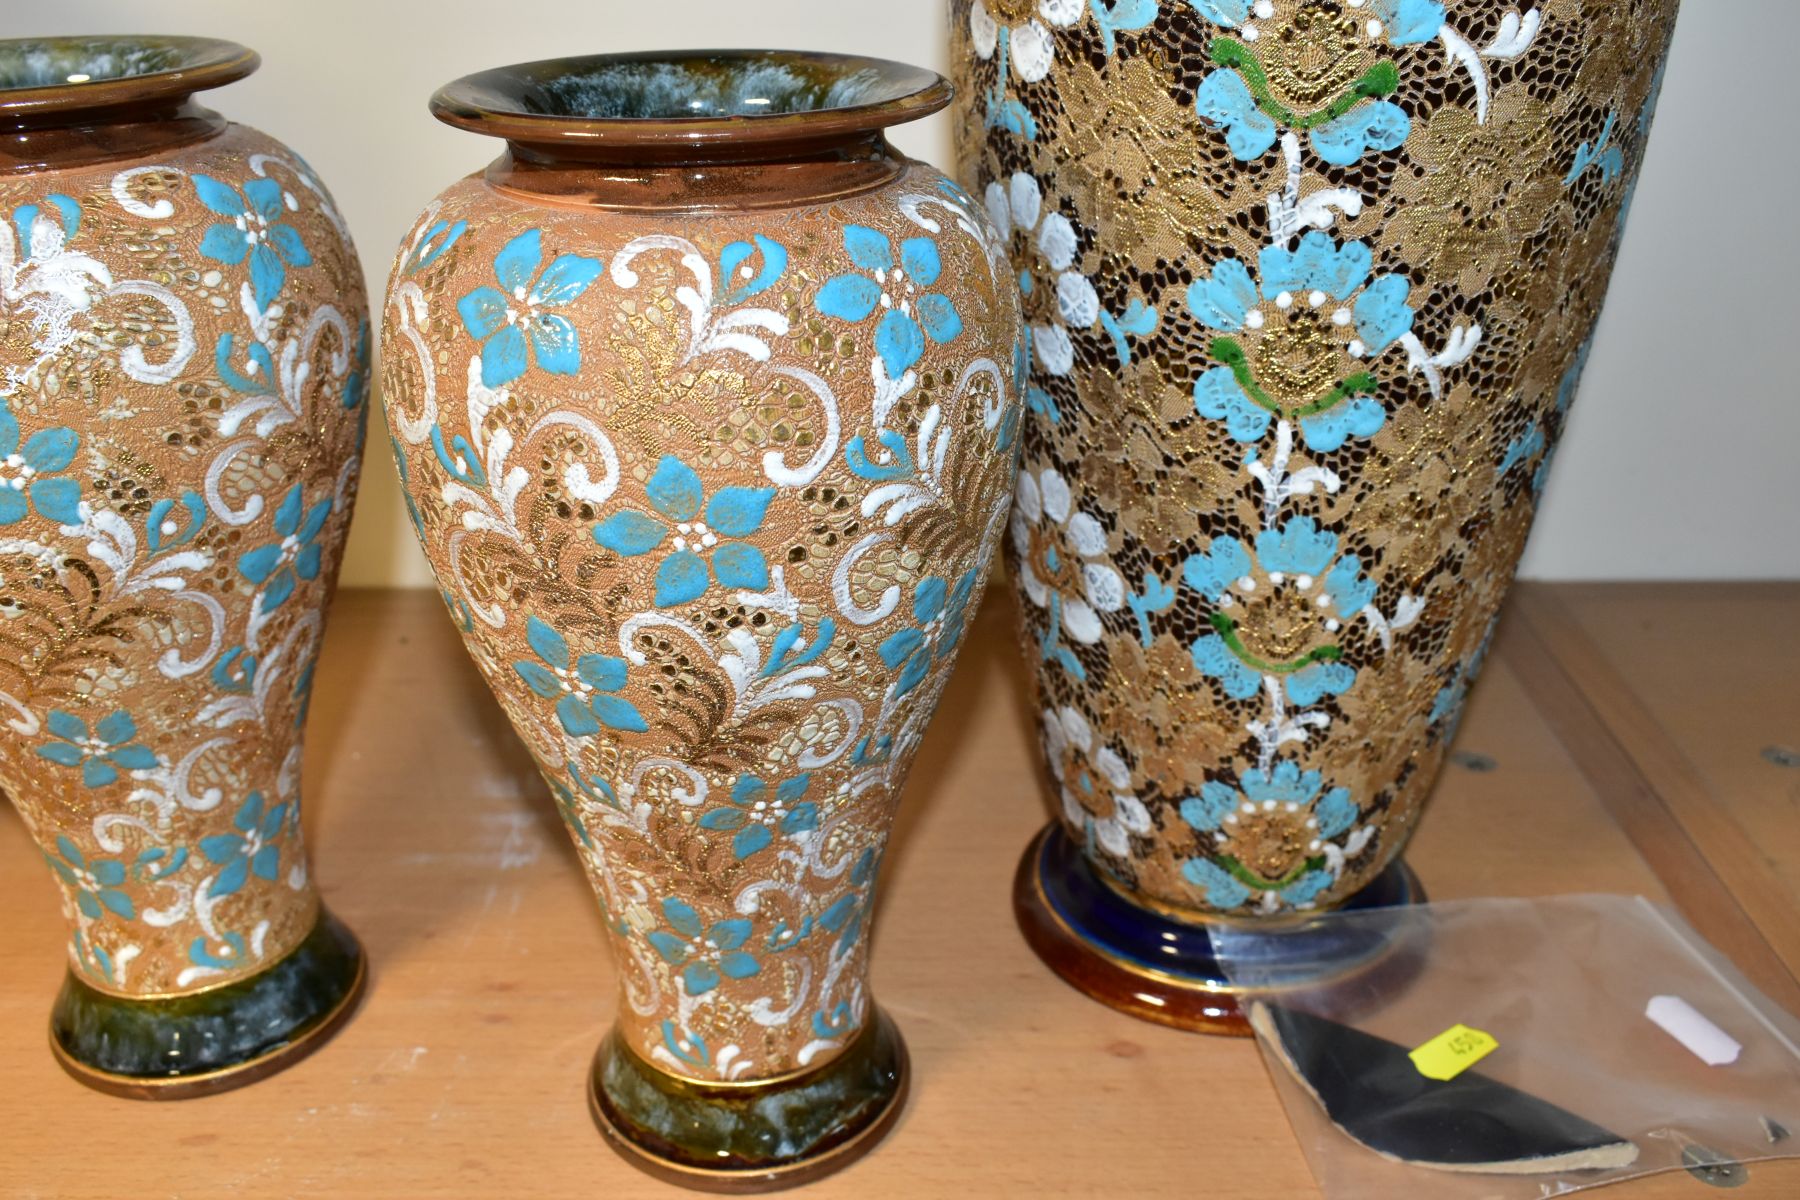 TWO PAIRS OF ROYAL DOULTON SLATERS PATENT BALUSTER VASES, the taller pair with flared rims, one with - Image 3 of 9